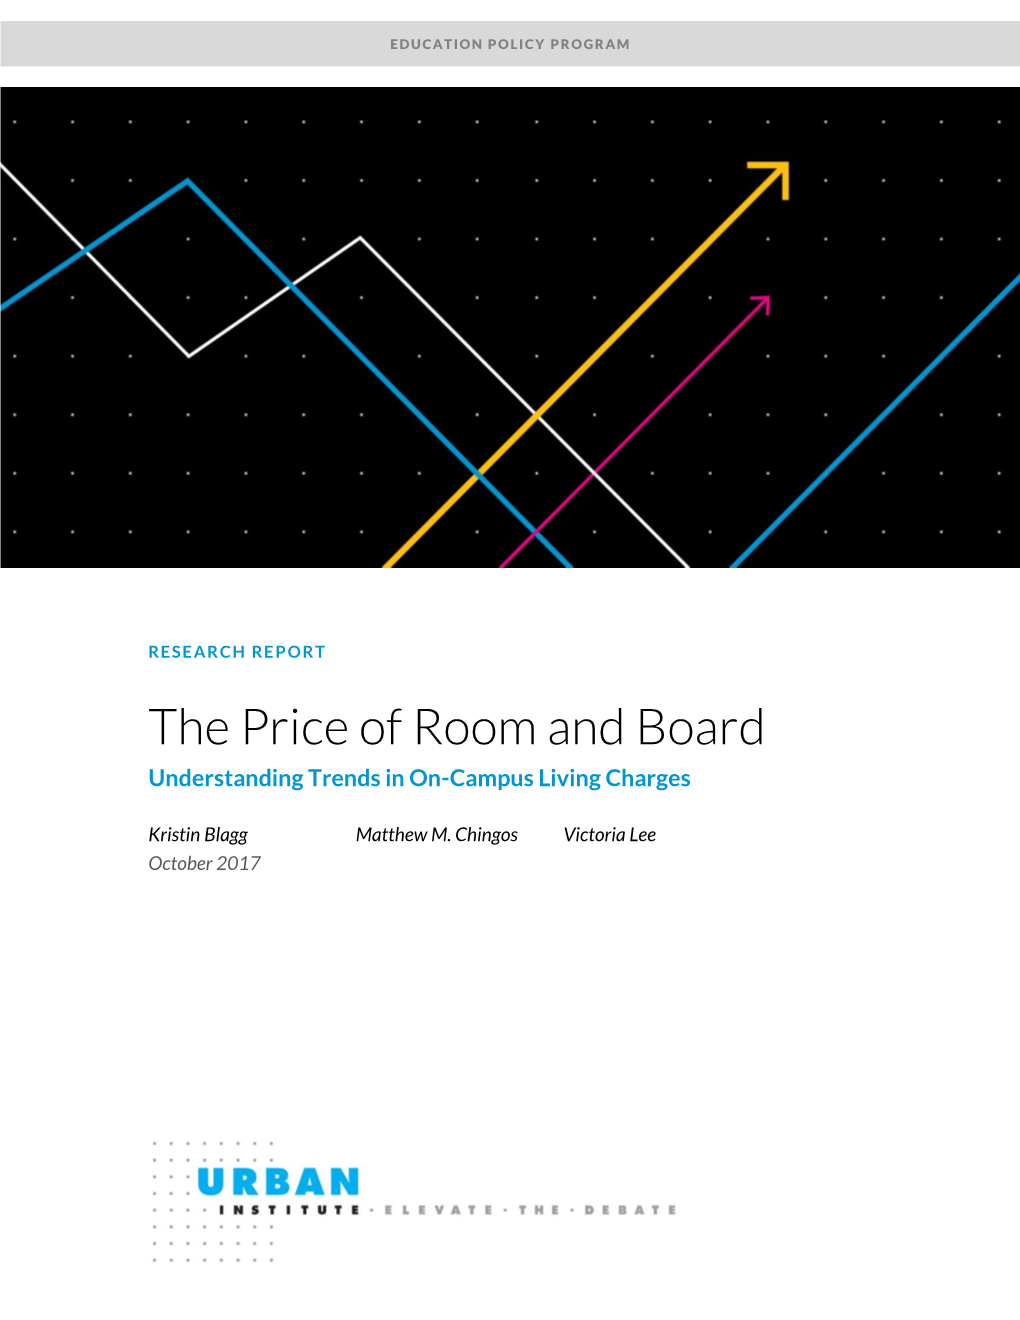 The Price of Room and Board Understanding Trends in On-Campus Living Charges